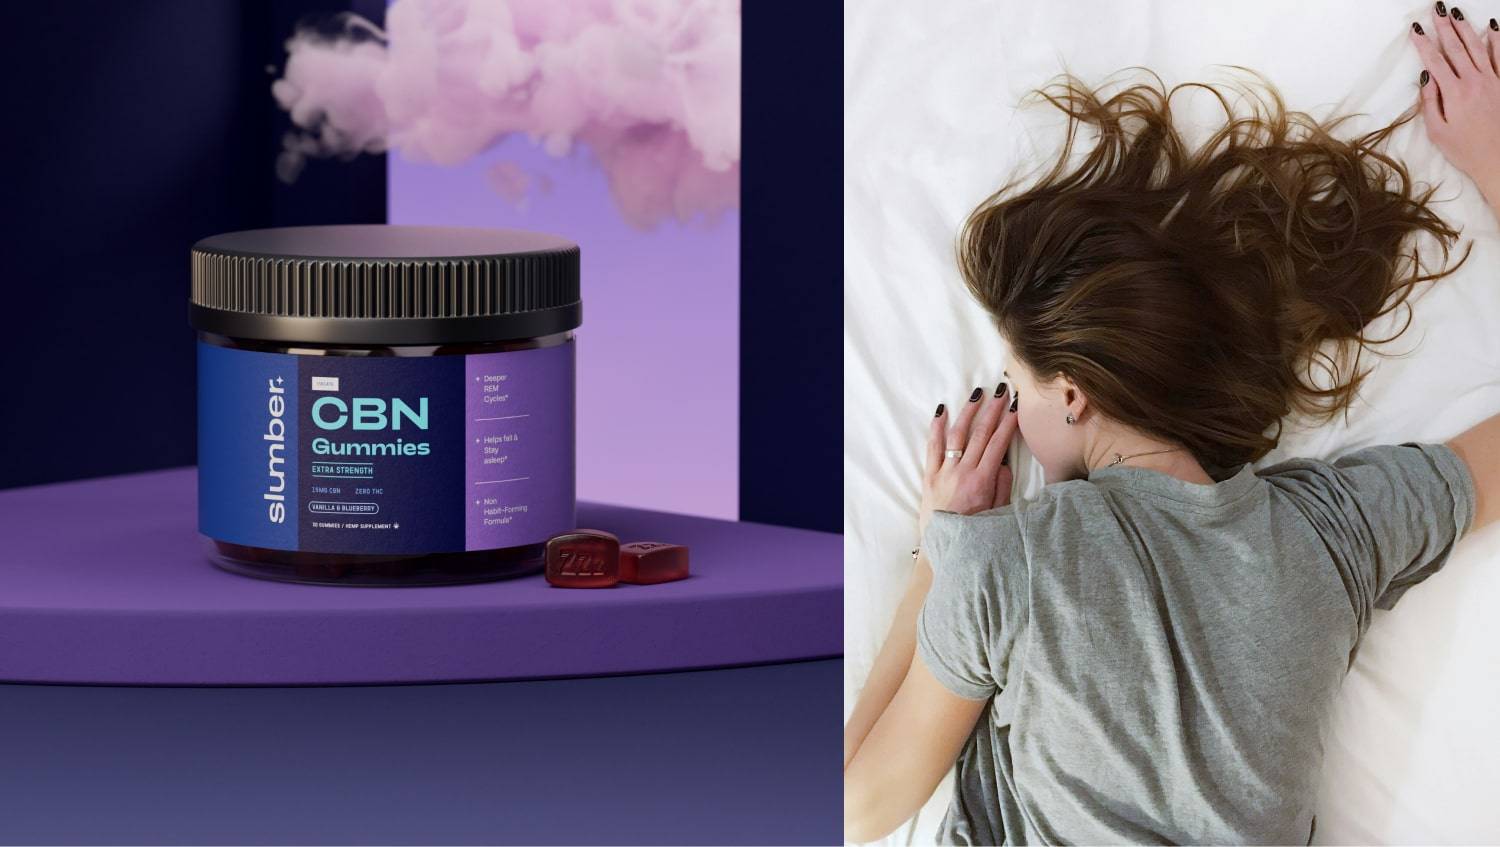 Slumber CBN Gummies supplement container with clouds of vapor in the background on the left; a woman peacefully sleeping on her back on the right, suggesting the sleep-enhancing benefits of the product.